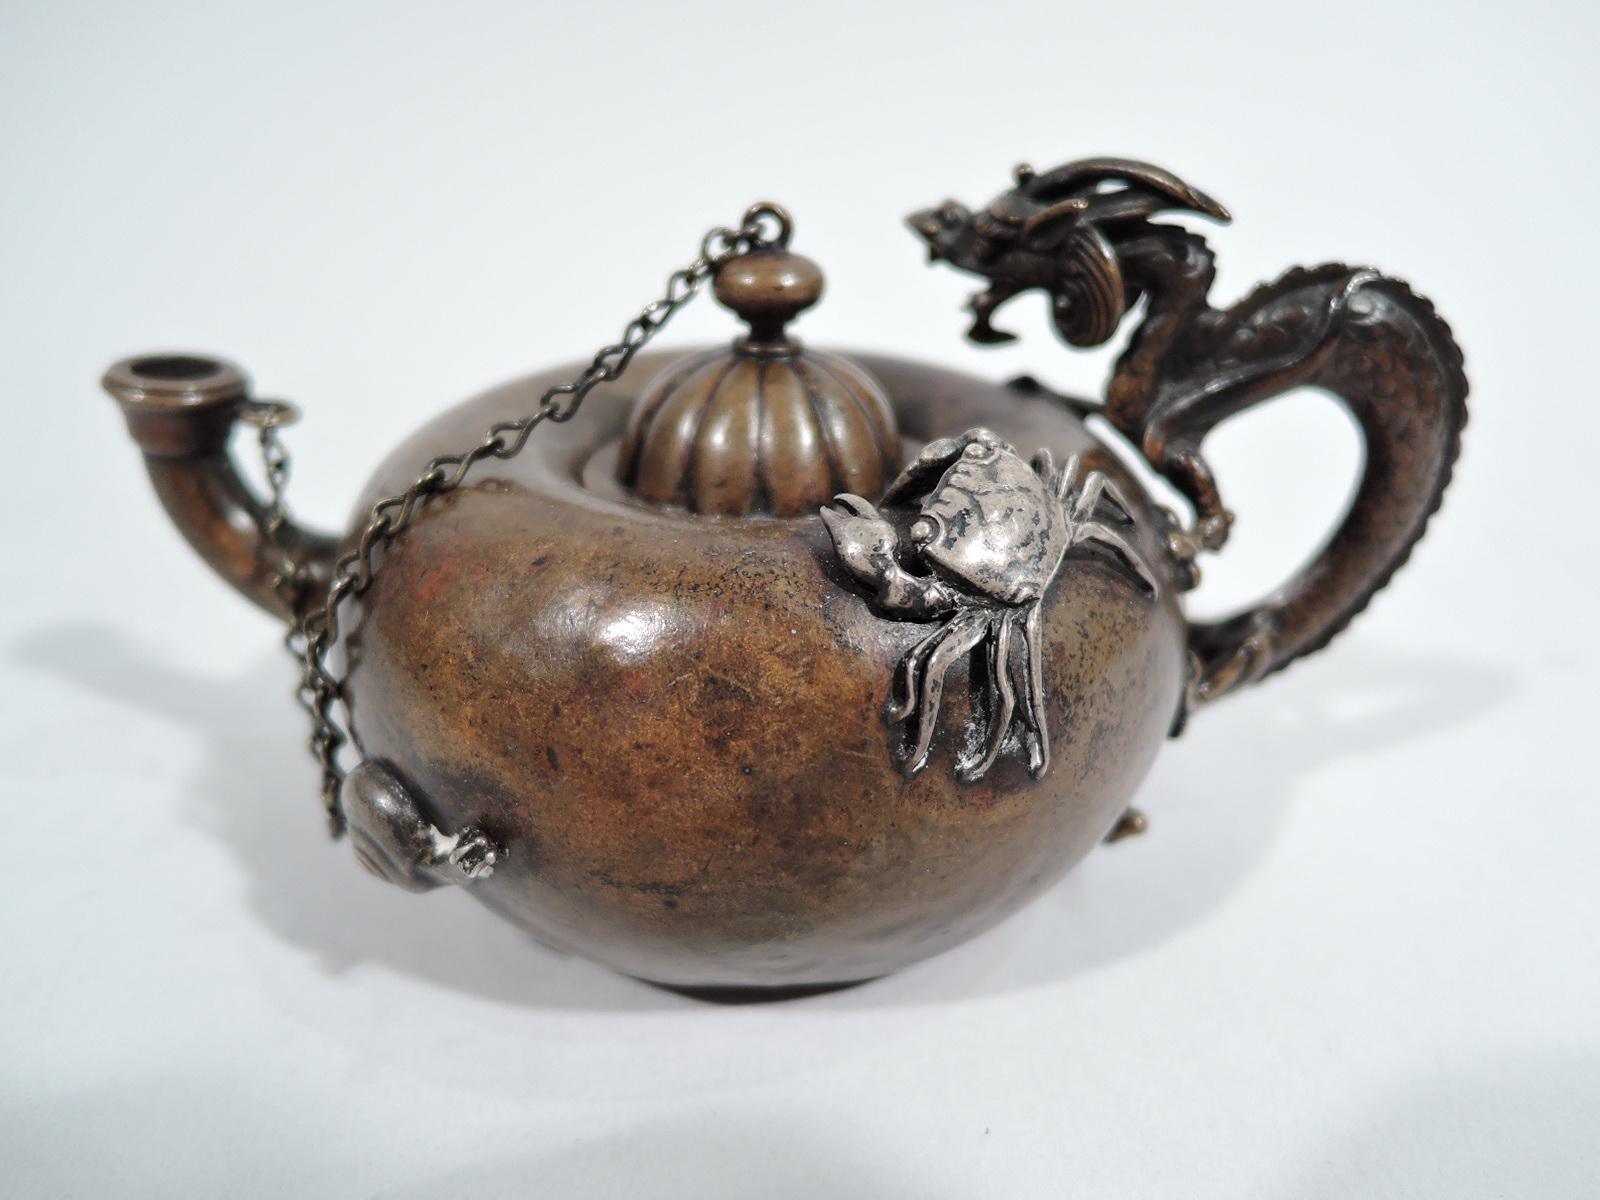 Japonesque mixed metal cigar lighter. Made by Gorham in Providence in 1905. Copper saki-pot form with bellied body and cast handle in form of dragon with horned head and talons gripping sides. Upturned spout. Domed and lobed cover chained to spout.